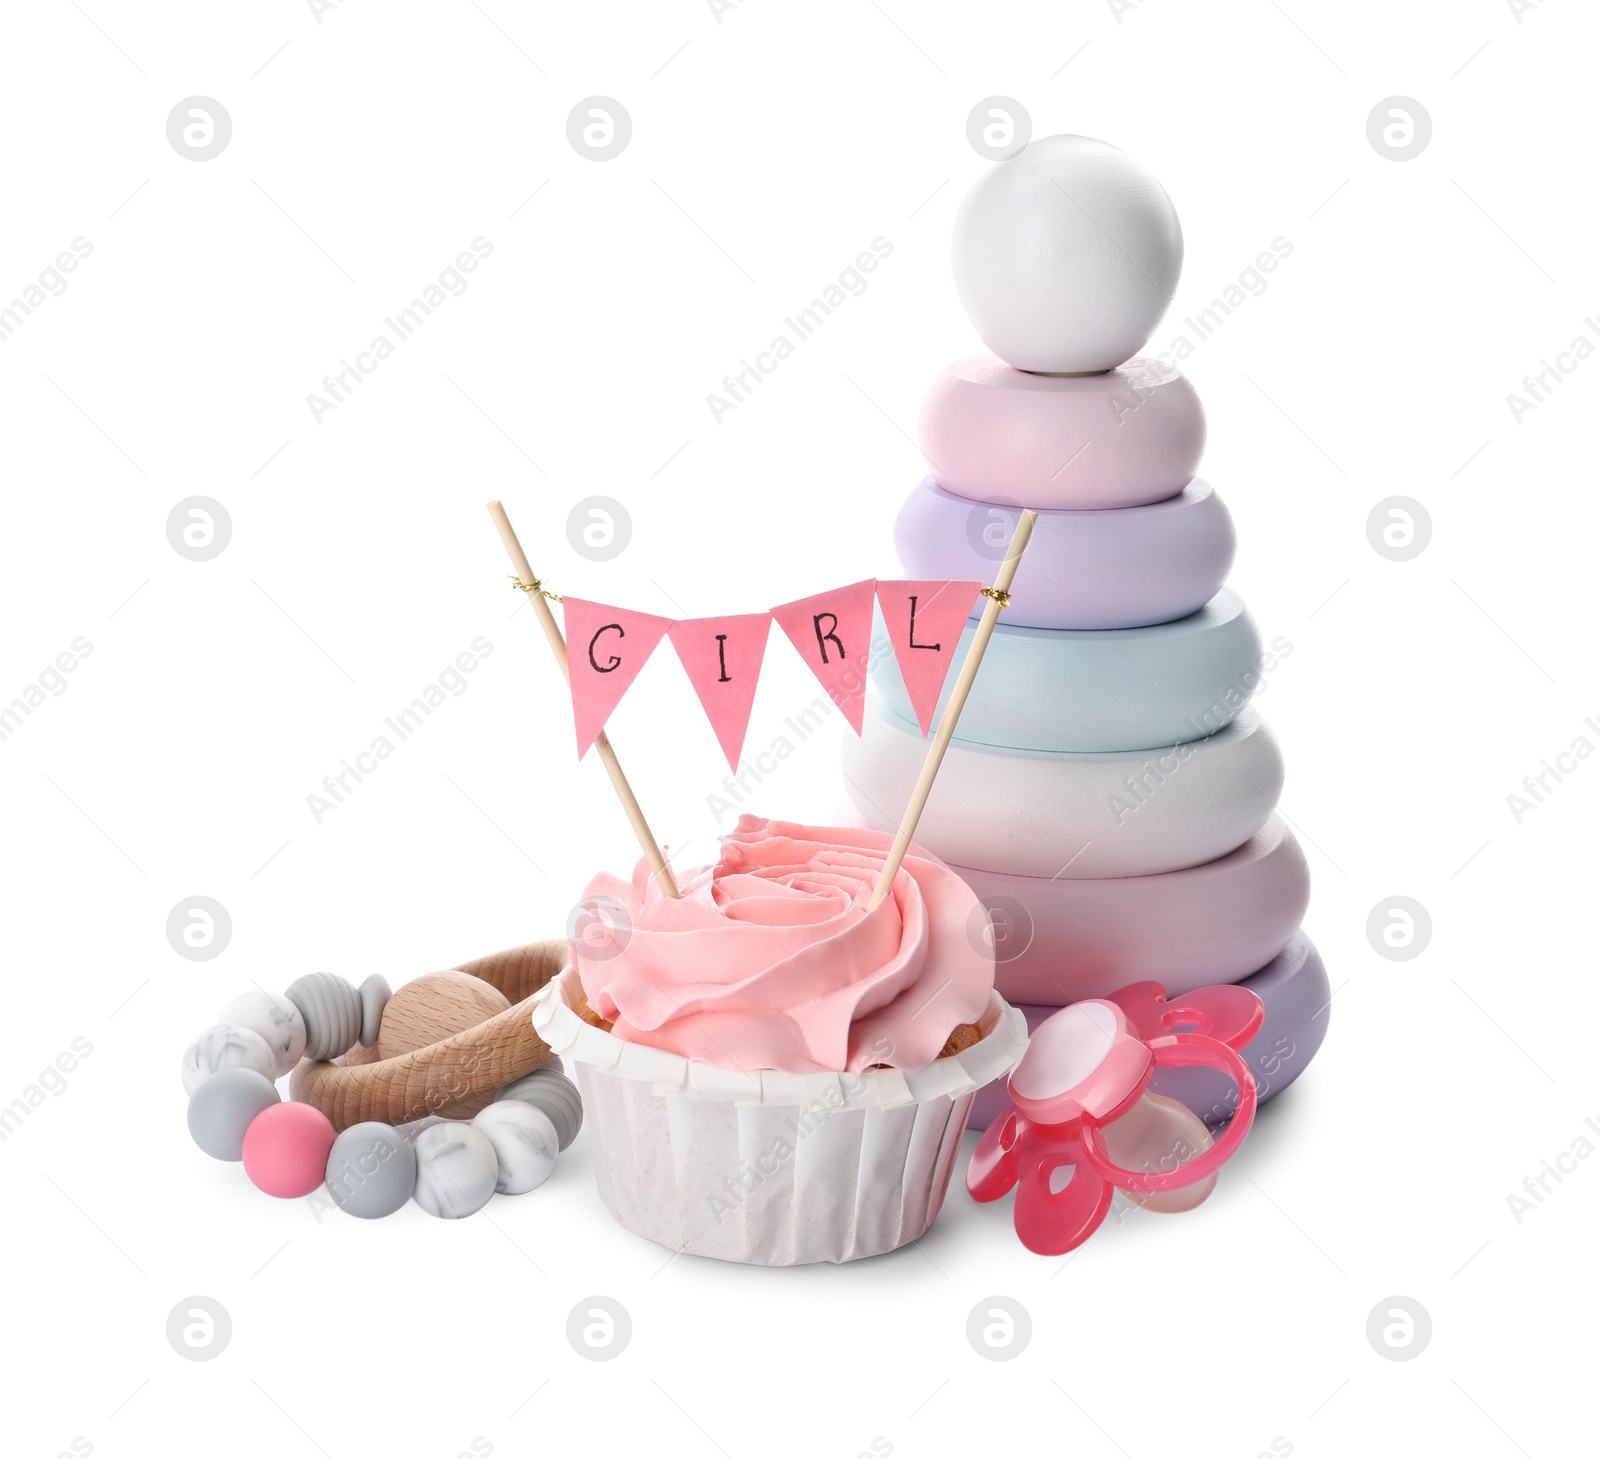 Photo of Baby shower cupcake with Girl topper near pacifier and toys on white background